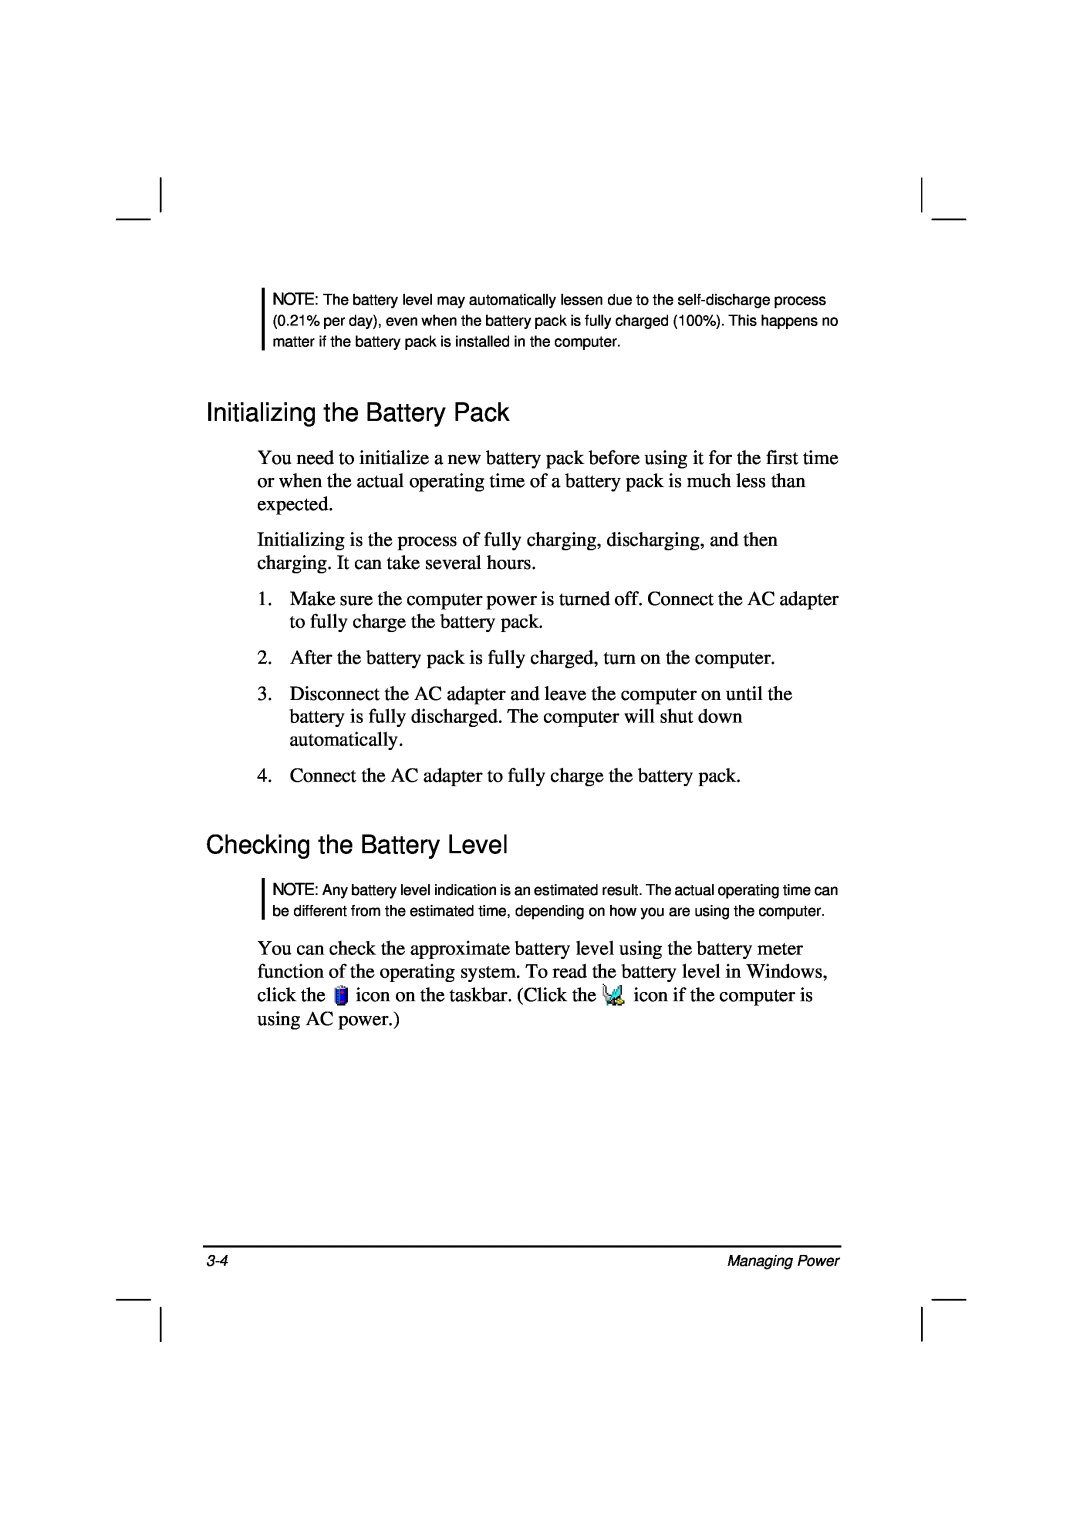 Casio HK1223 owner manual Initializing the Battery Pack, Checking the Battery Level 